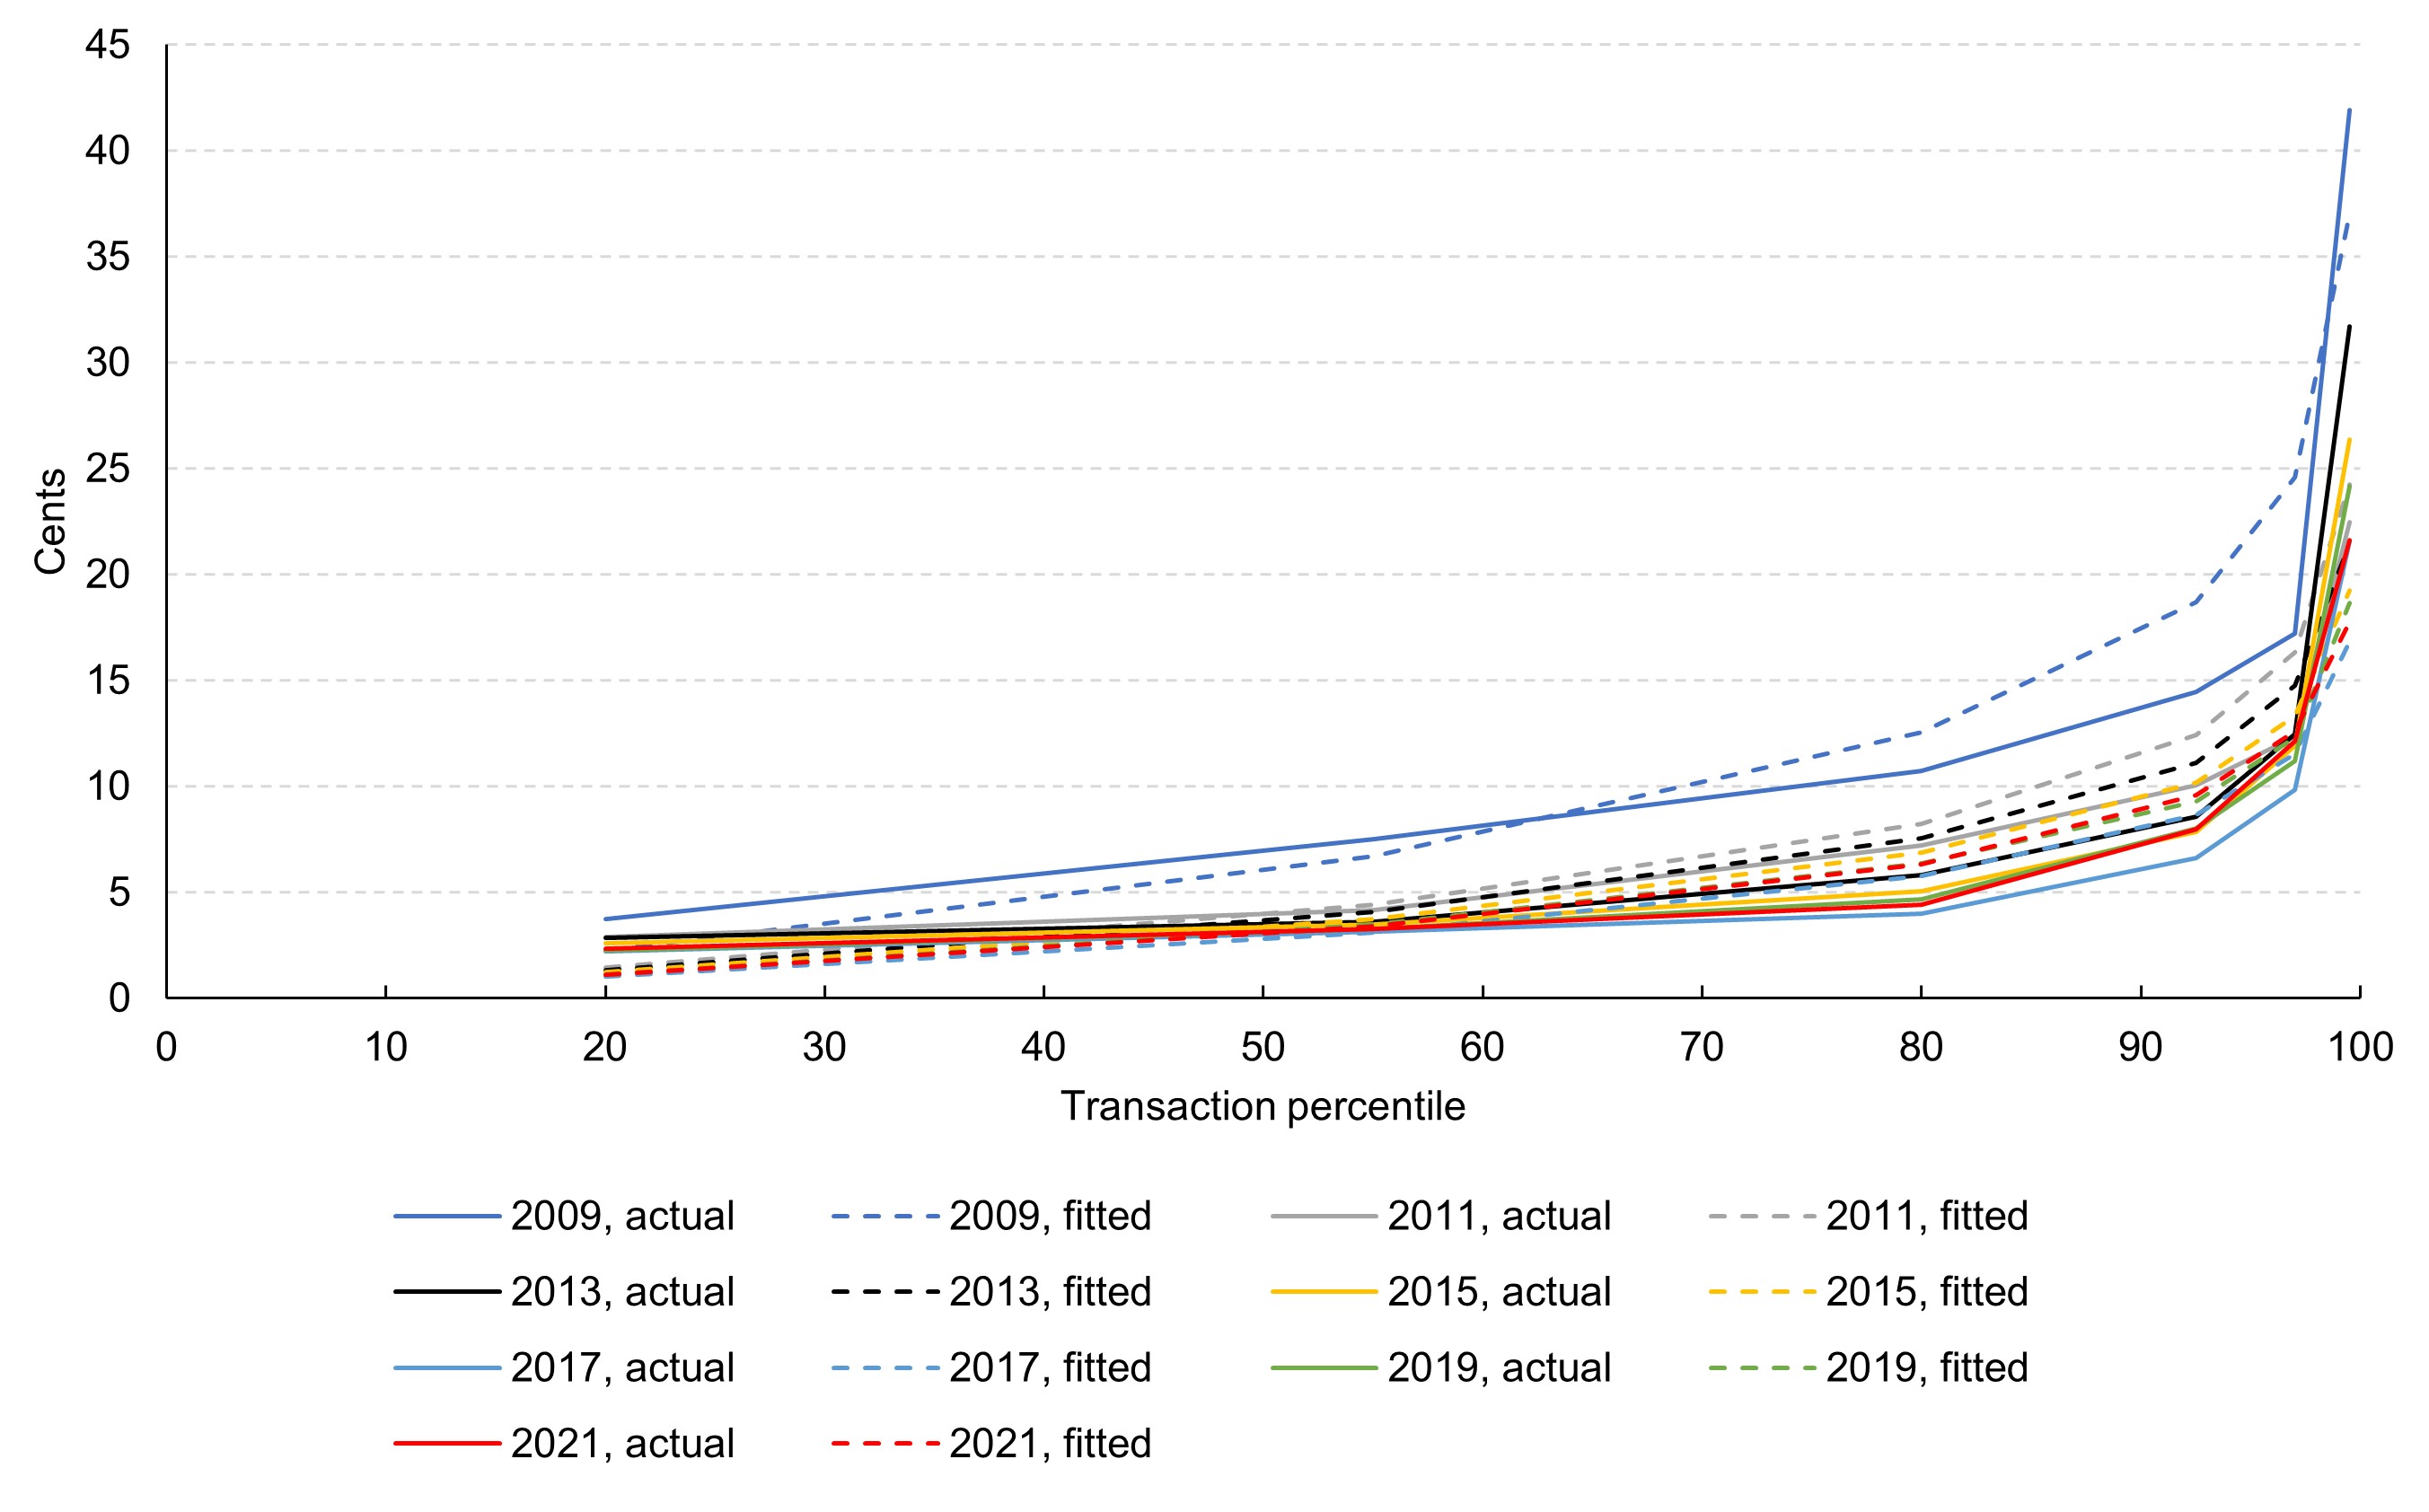 Figure 3: Average per-transaction base component costs of covered issuer transactions, in cents, by transaction percentile range and year – actual versus fitted (Weibull) distribution